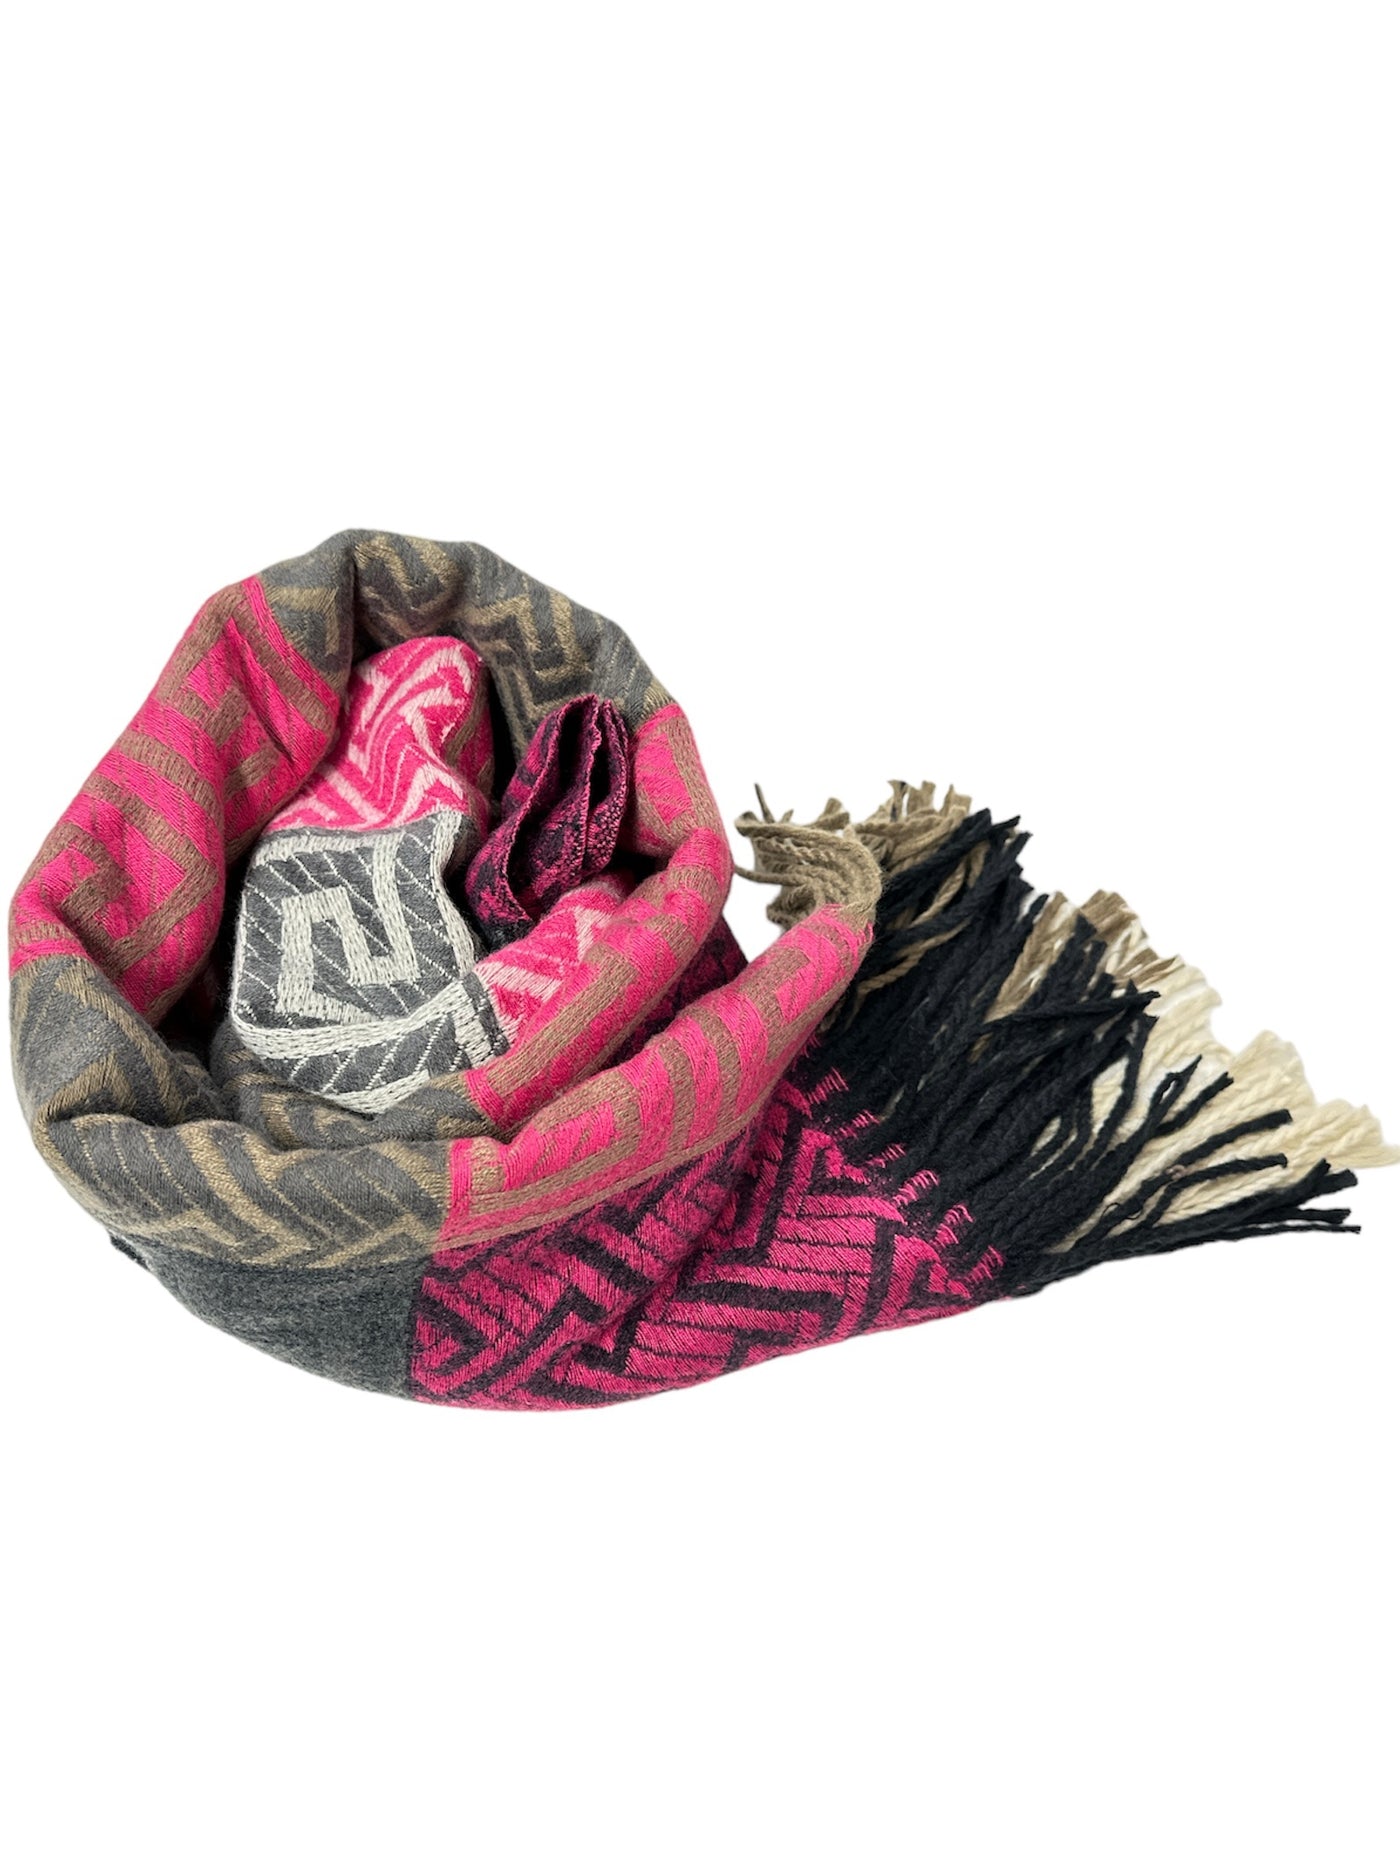 Pink & Charcoal Aztec Print Scarf with Fringe